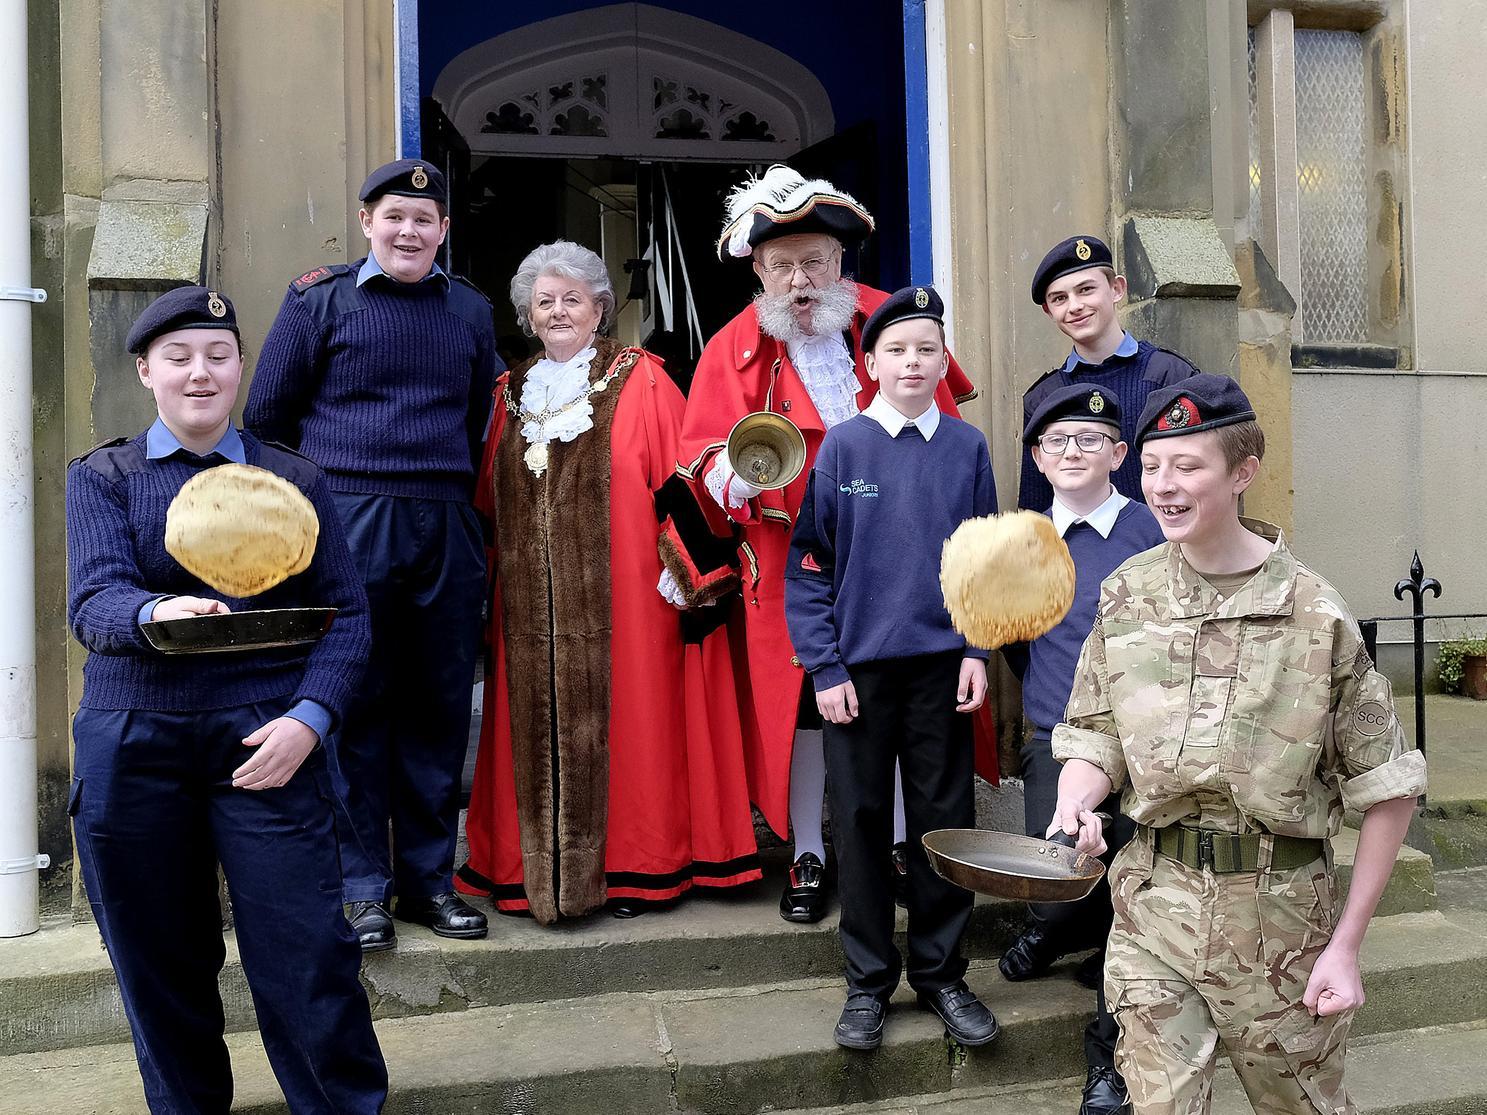 Mayor Hazel Lynskey and town crier David Birdsall visit the sea cadets for pancakes.